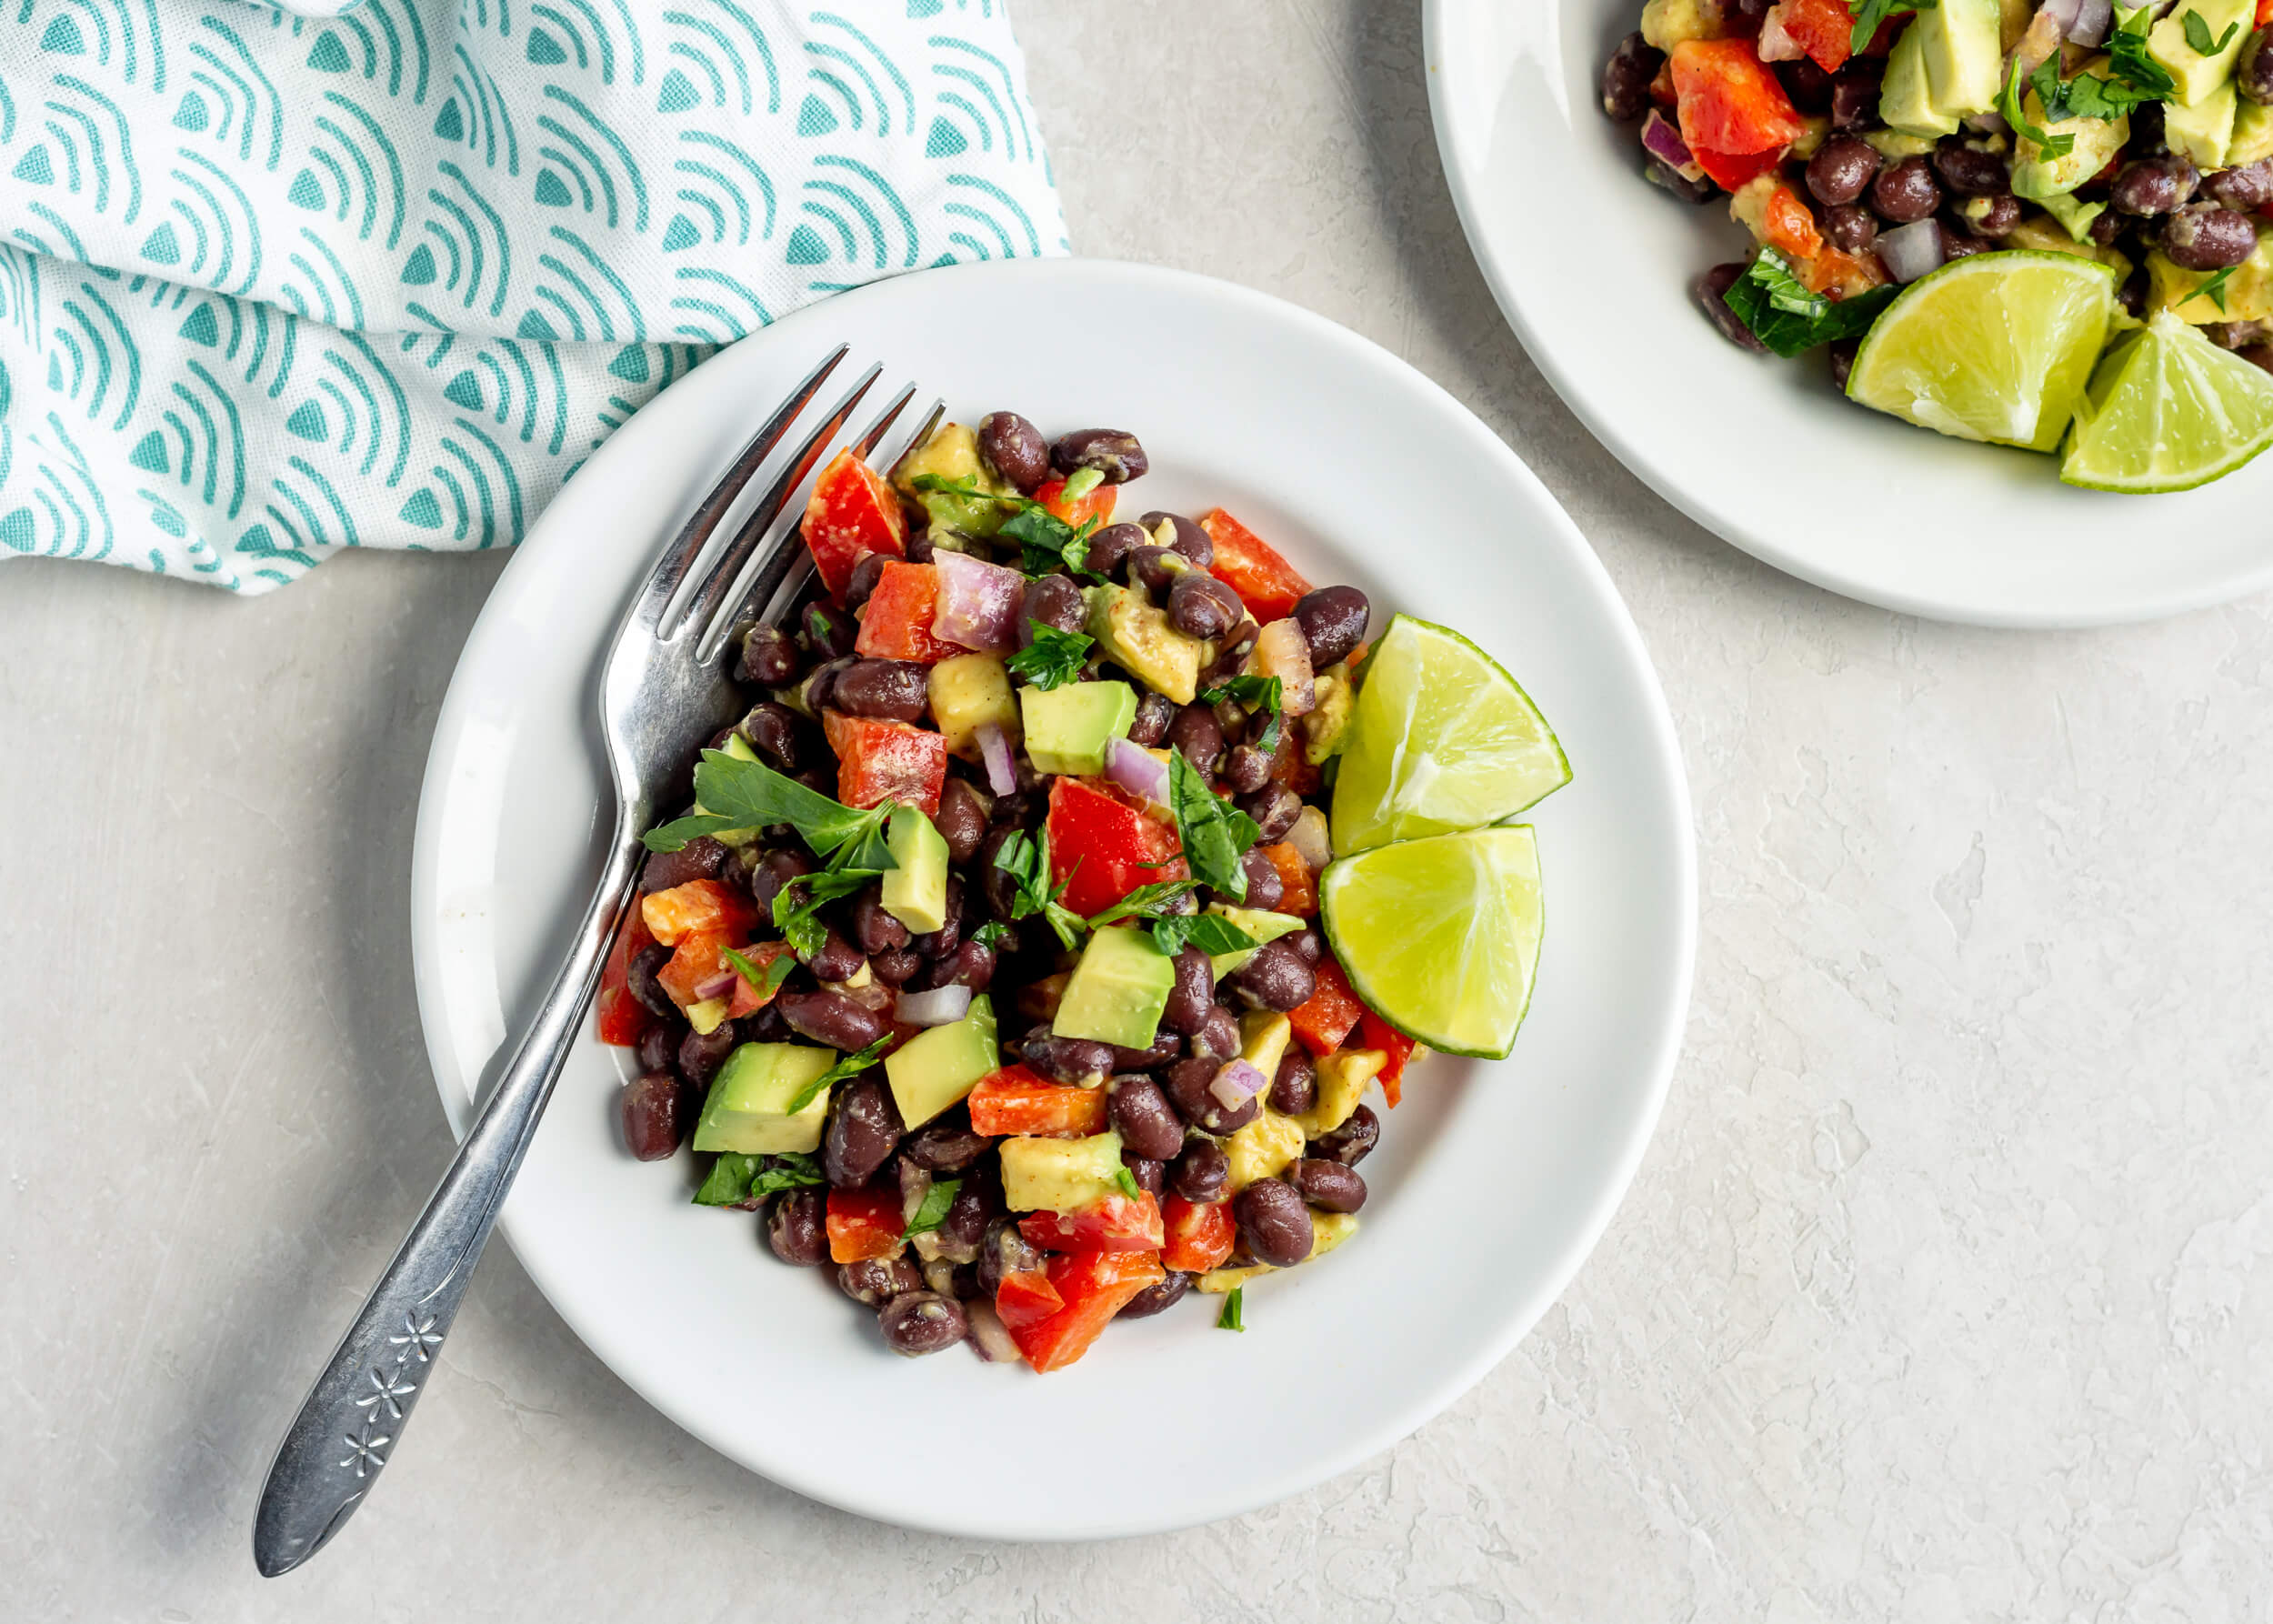 20 Healthy Meals to Help Your Clients Eat Healthy on a Tight Budget: Mexican Black Bean Salad